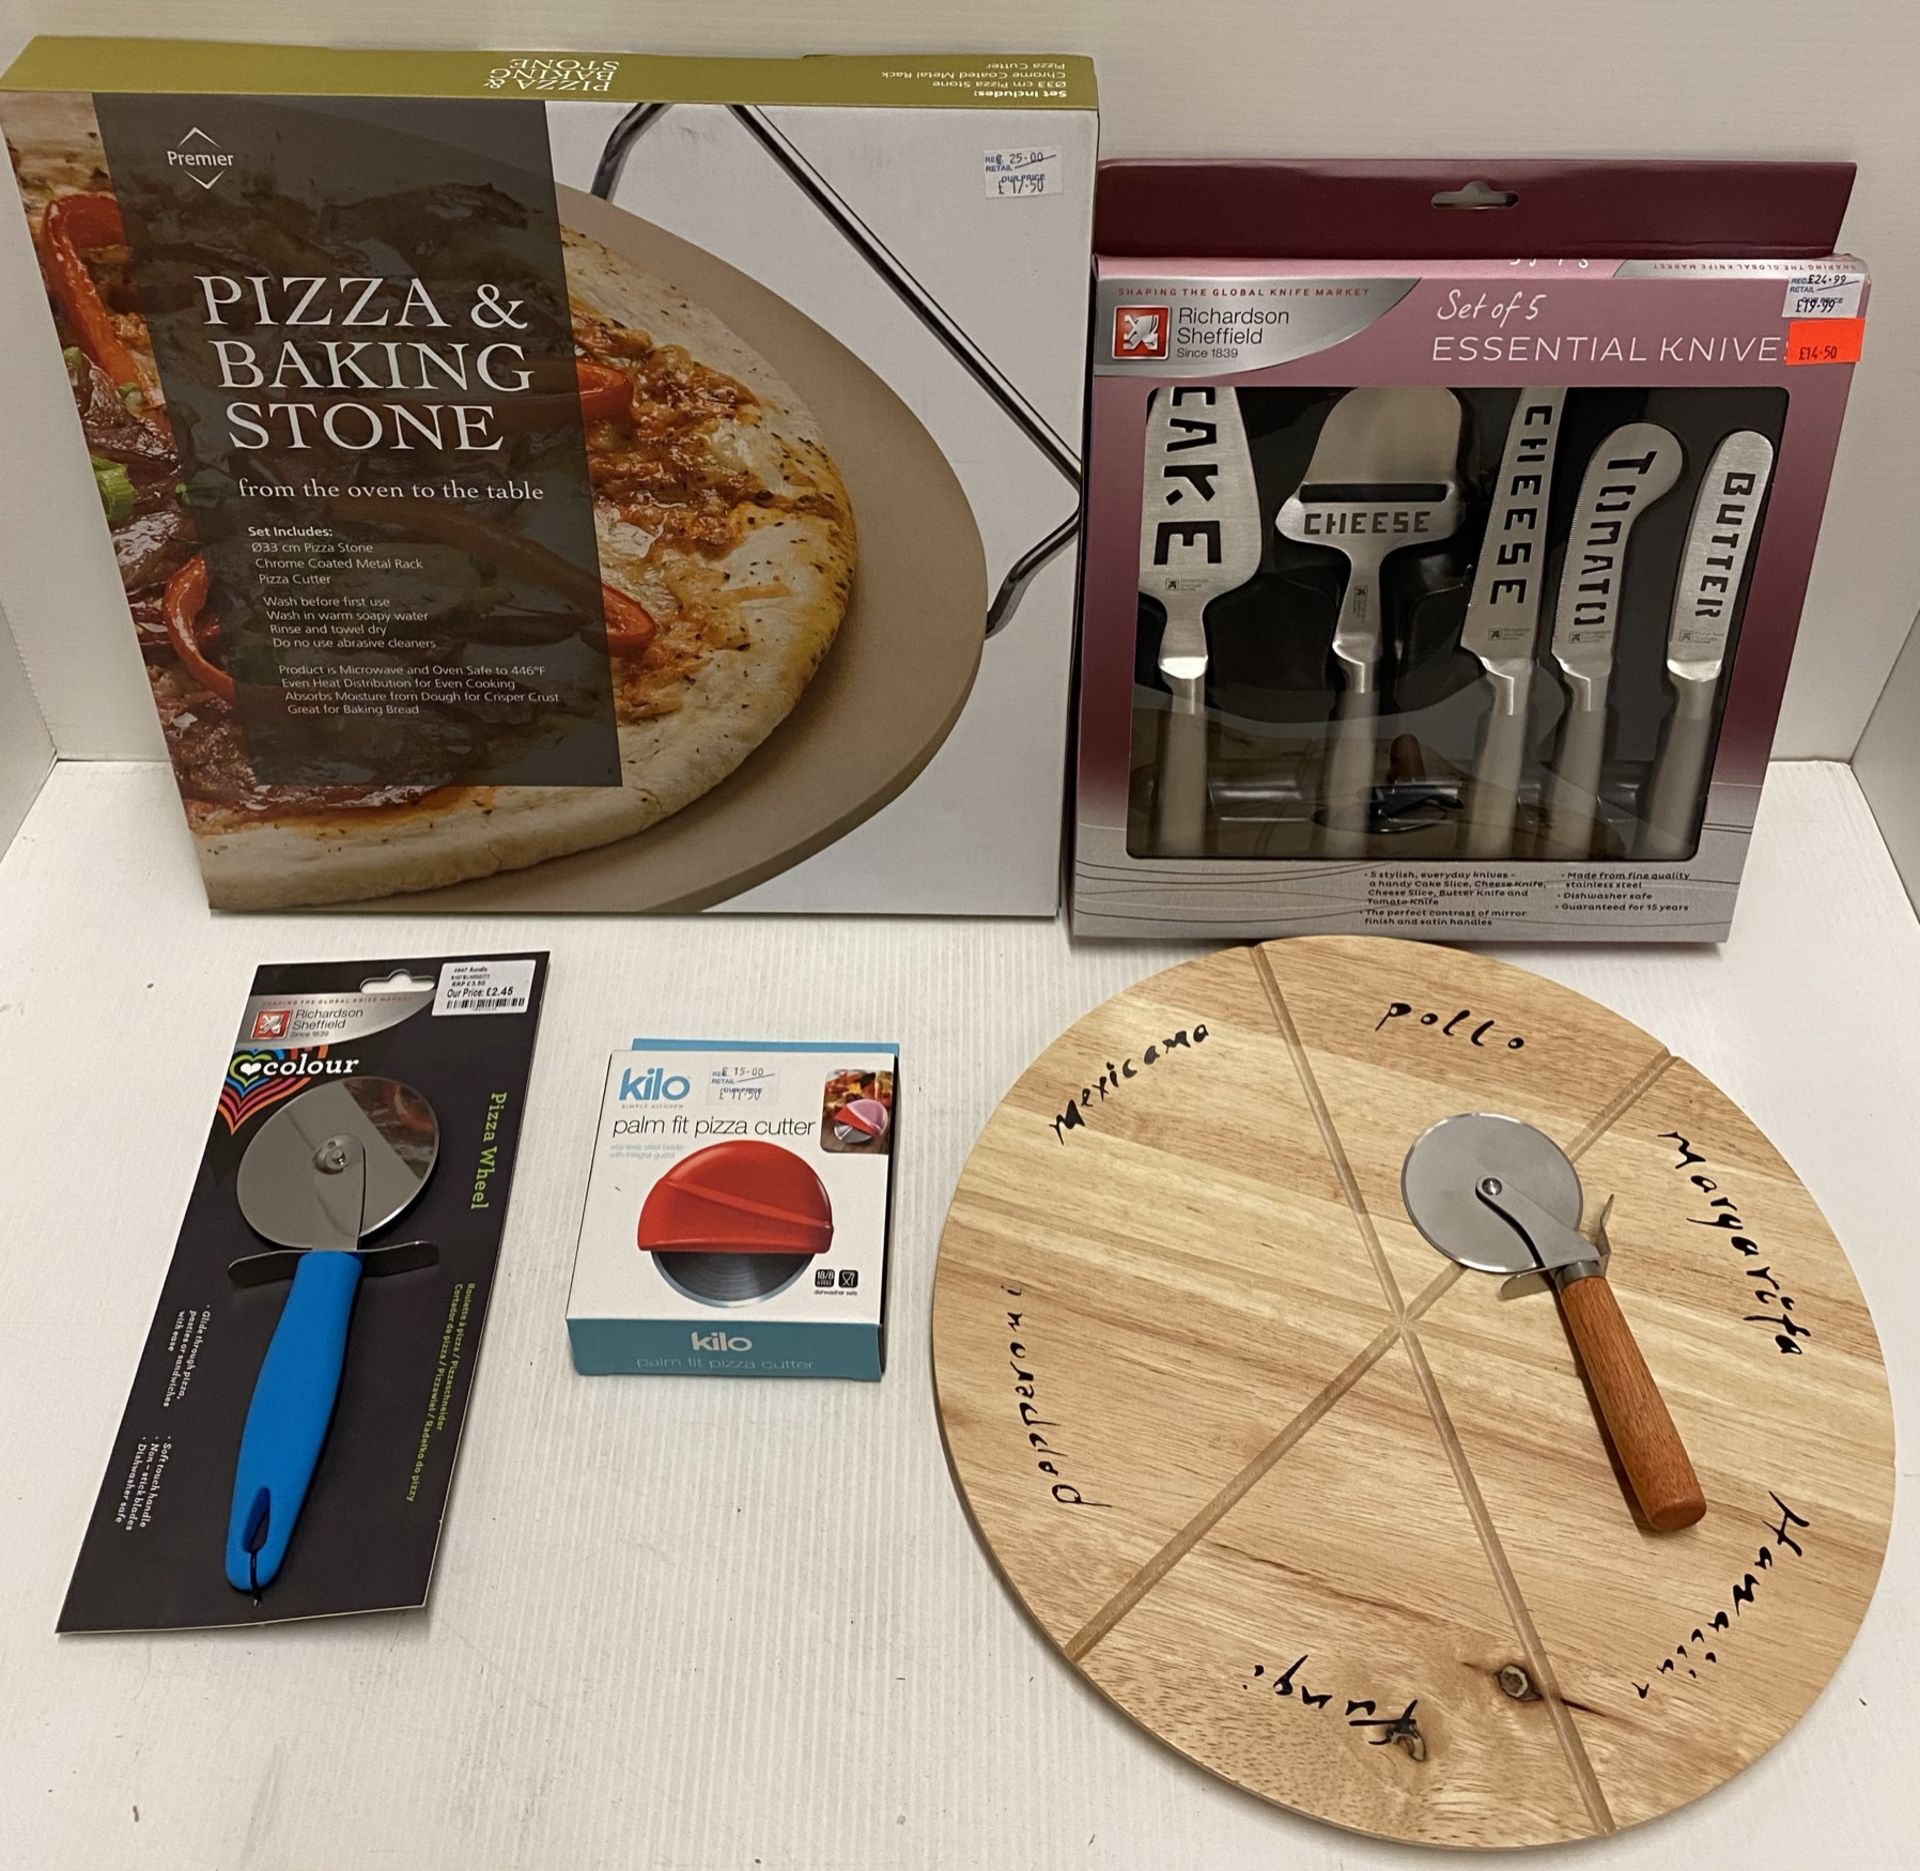 5 x assorted items - Premier pizza and baking stone, pizza cutters, essential knives etc - RRP £2.